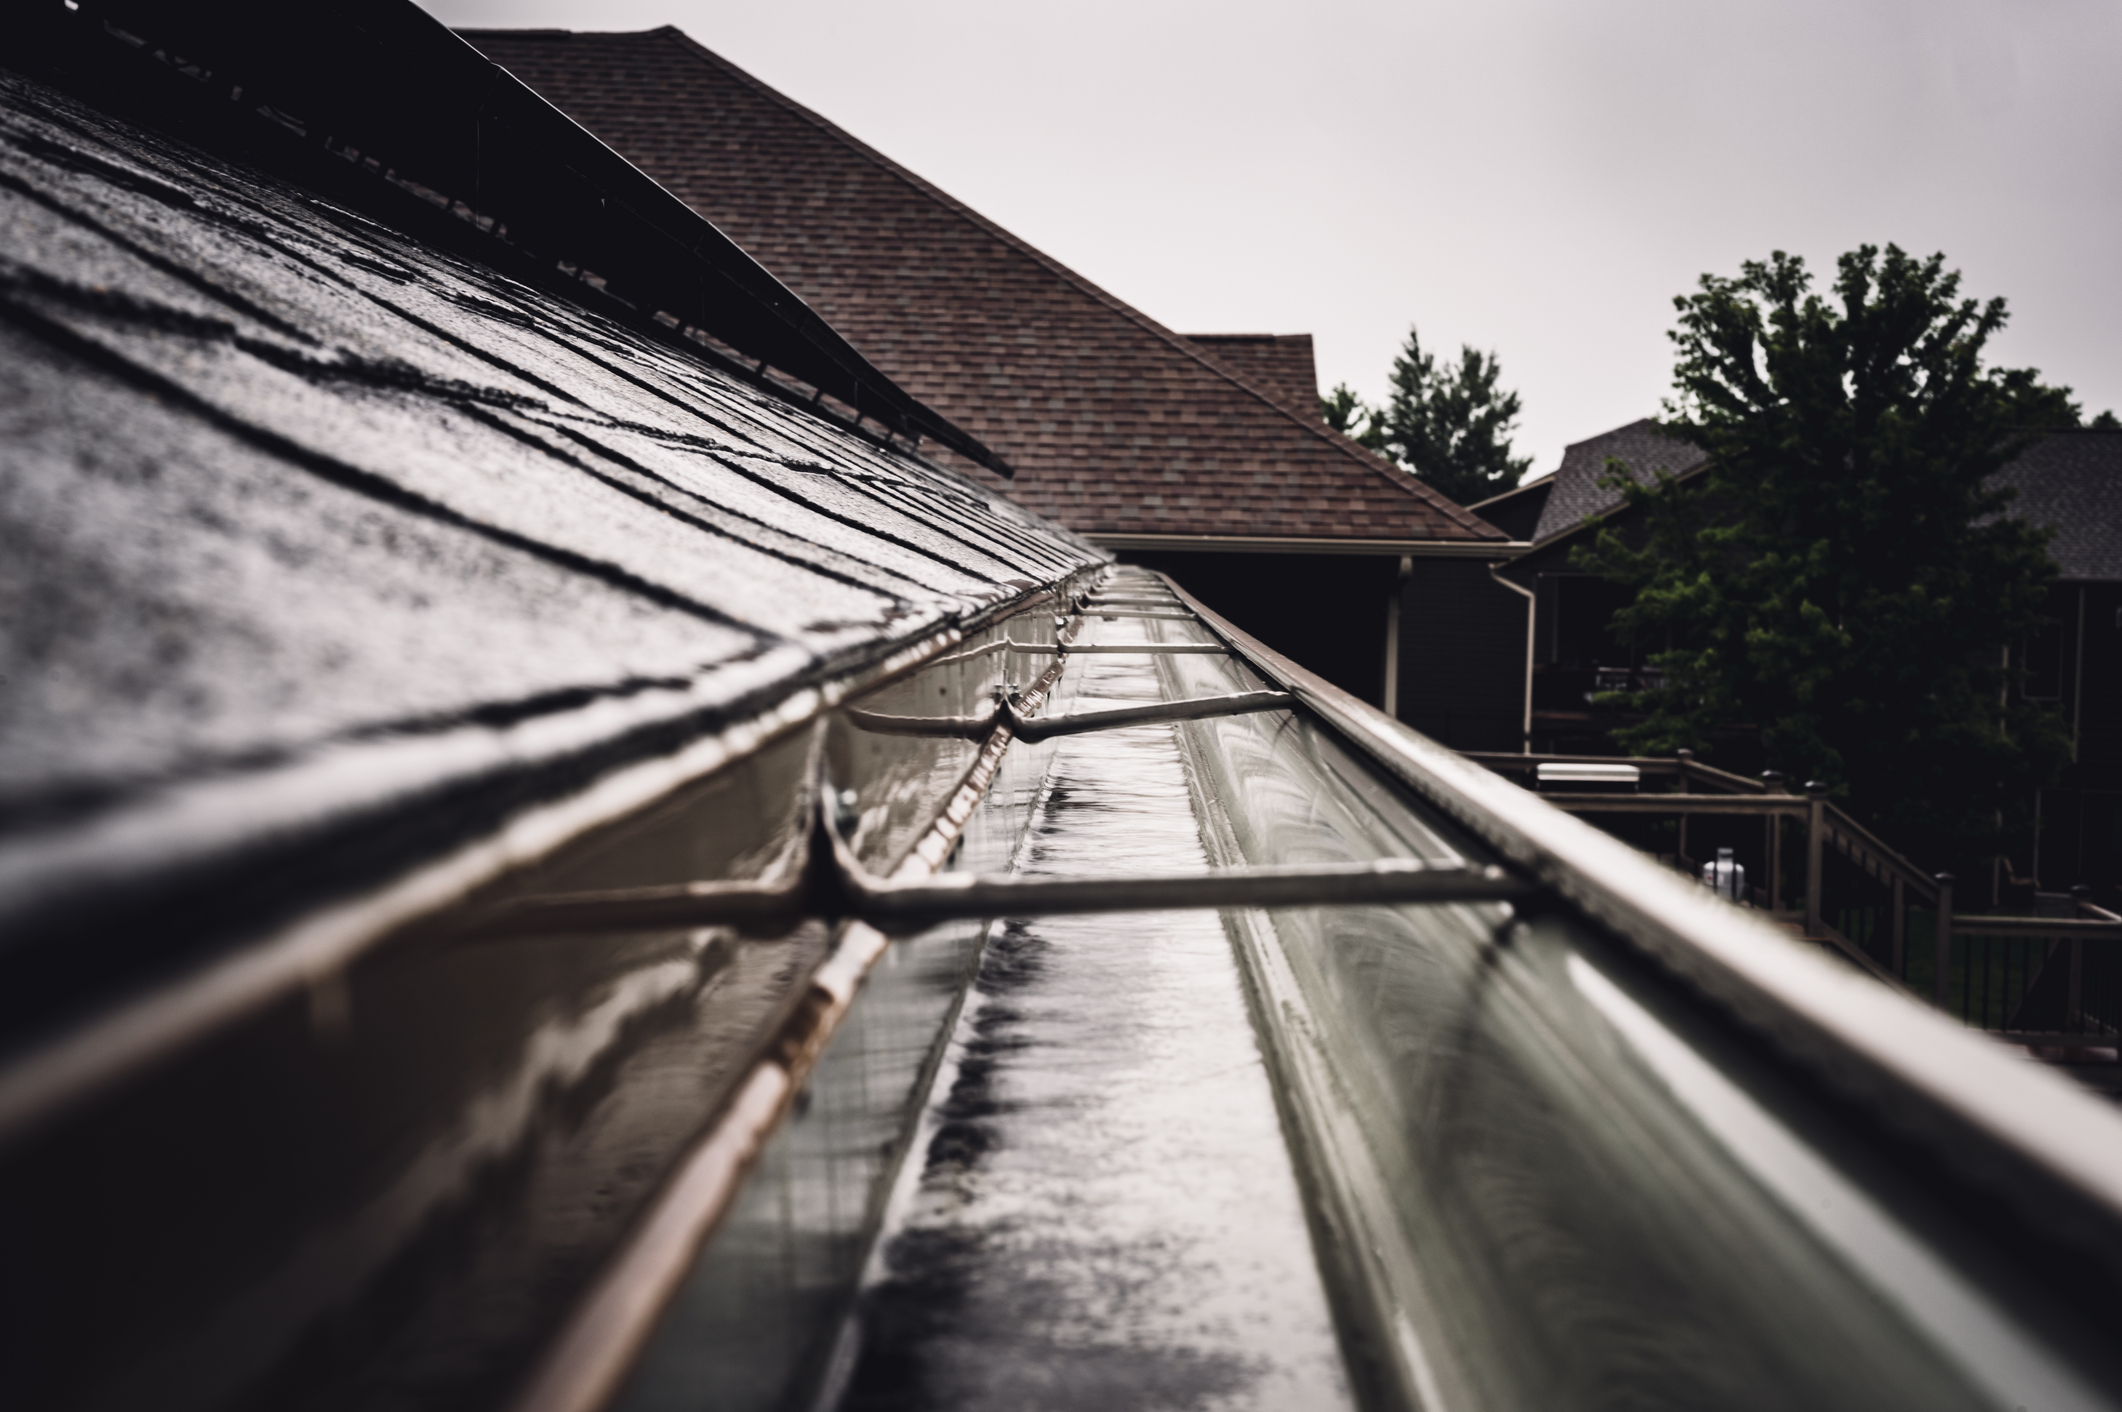 Rain gutters help move water away from your home's walls and foundation. Consider gutter repair if your gutters aren't doing the job.